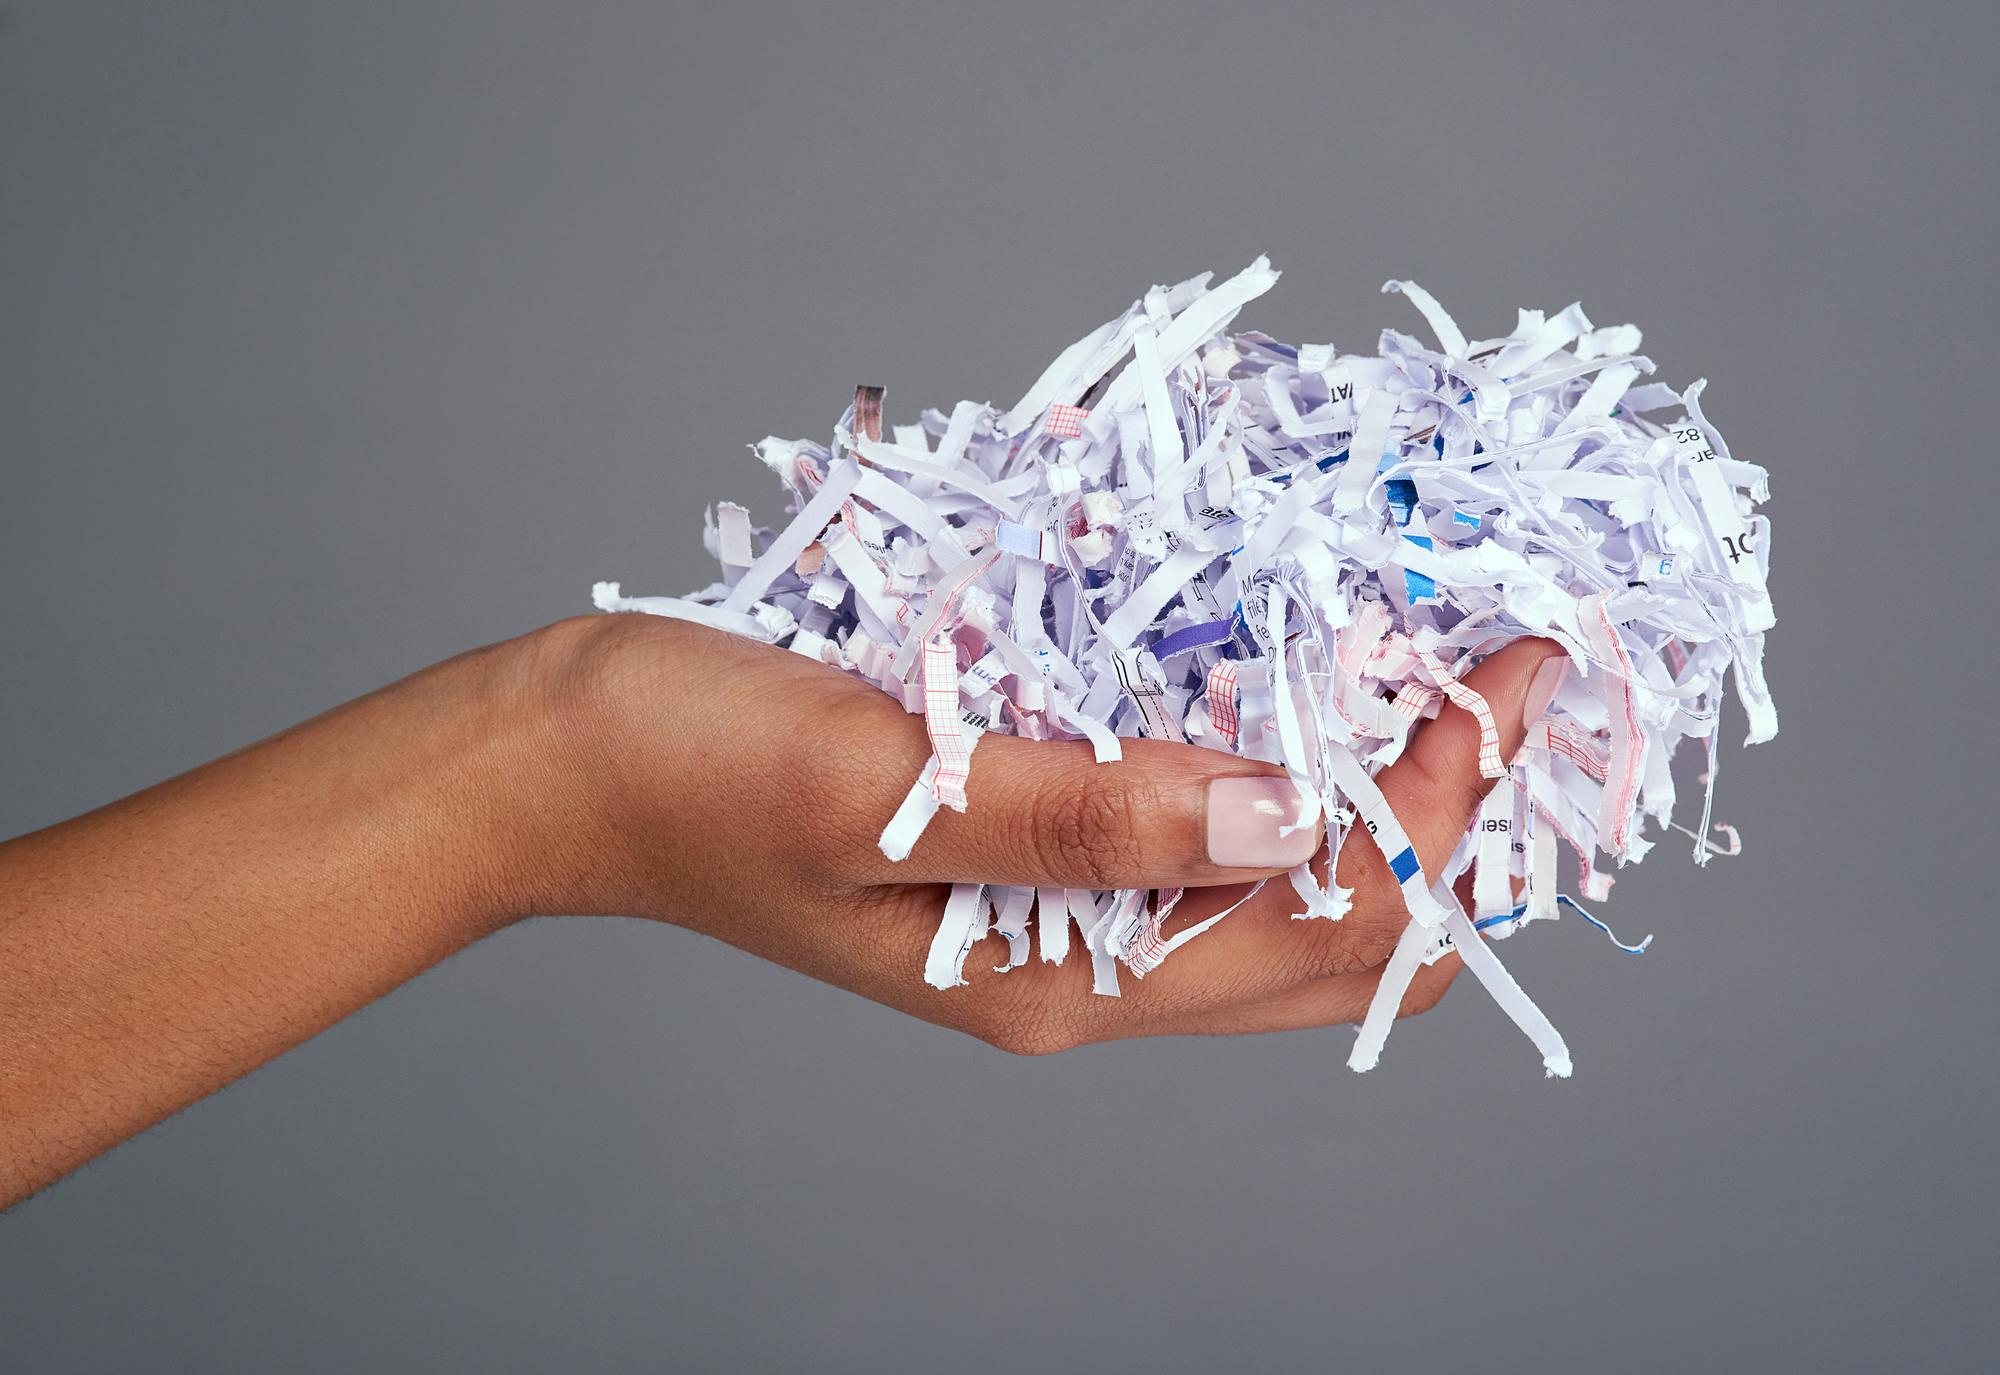 protect-your-information-studio-shot-womans-hand-holding-pile-shredded-paper-against-grey-background